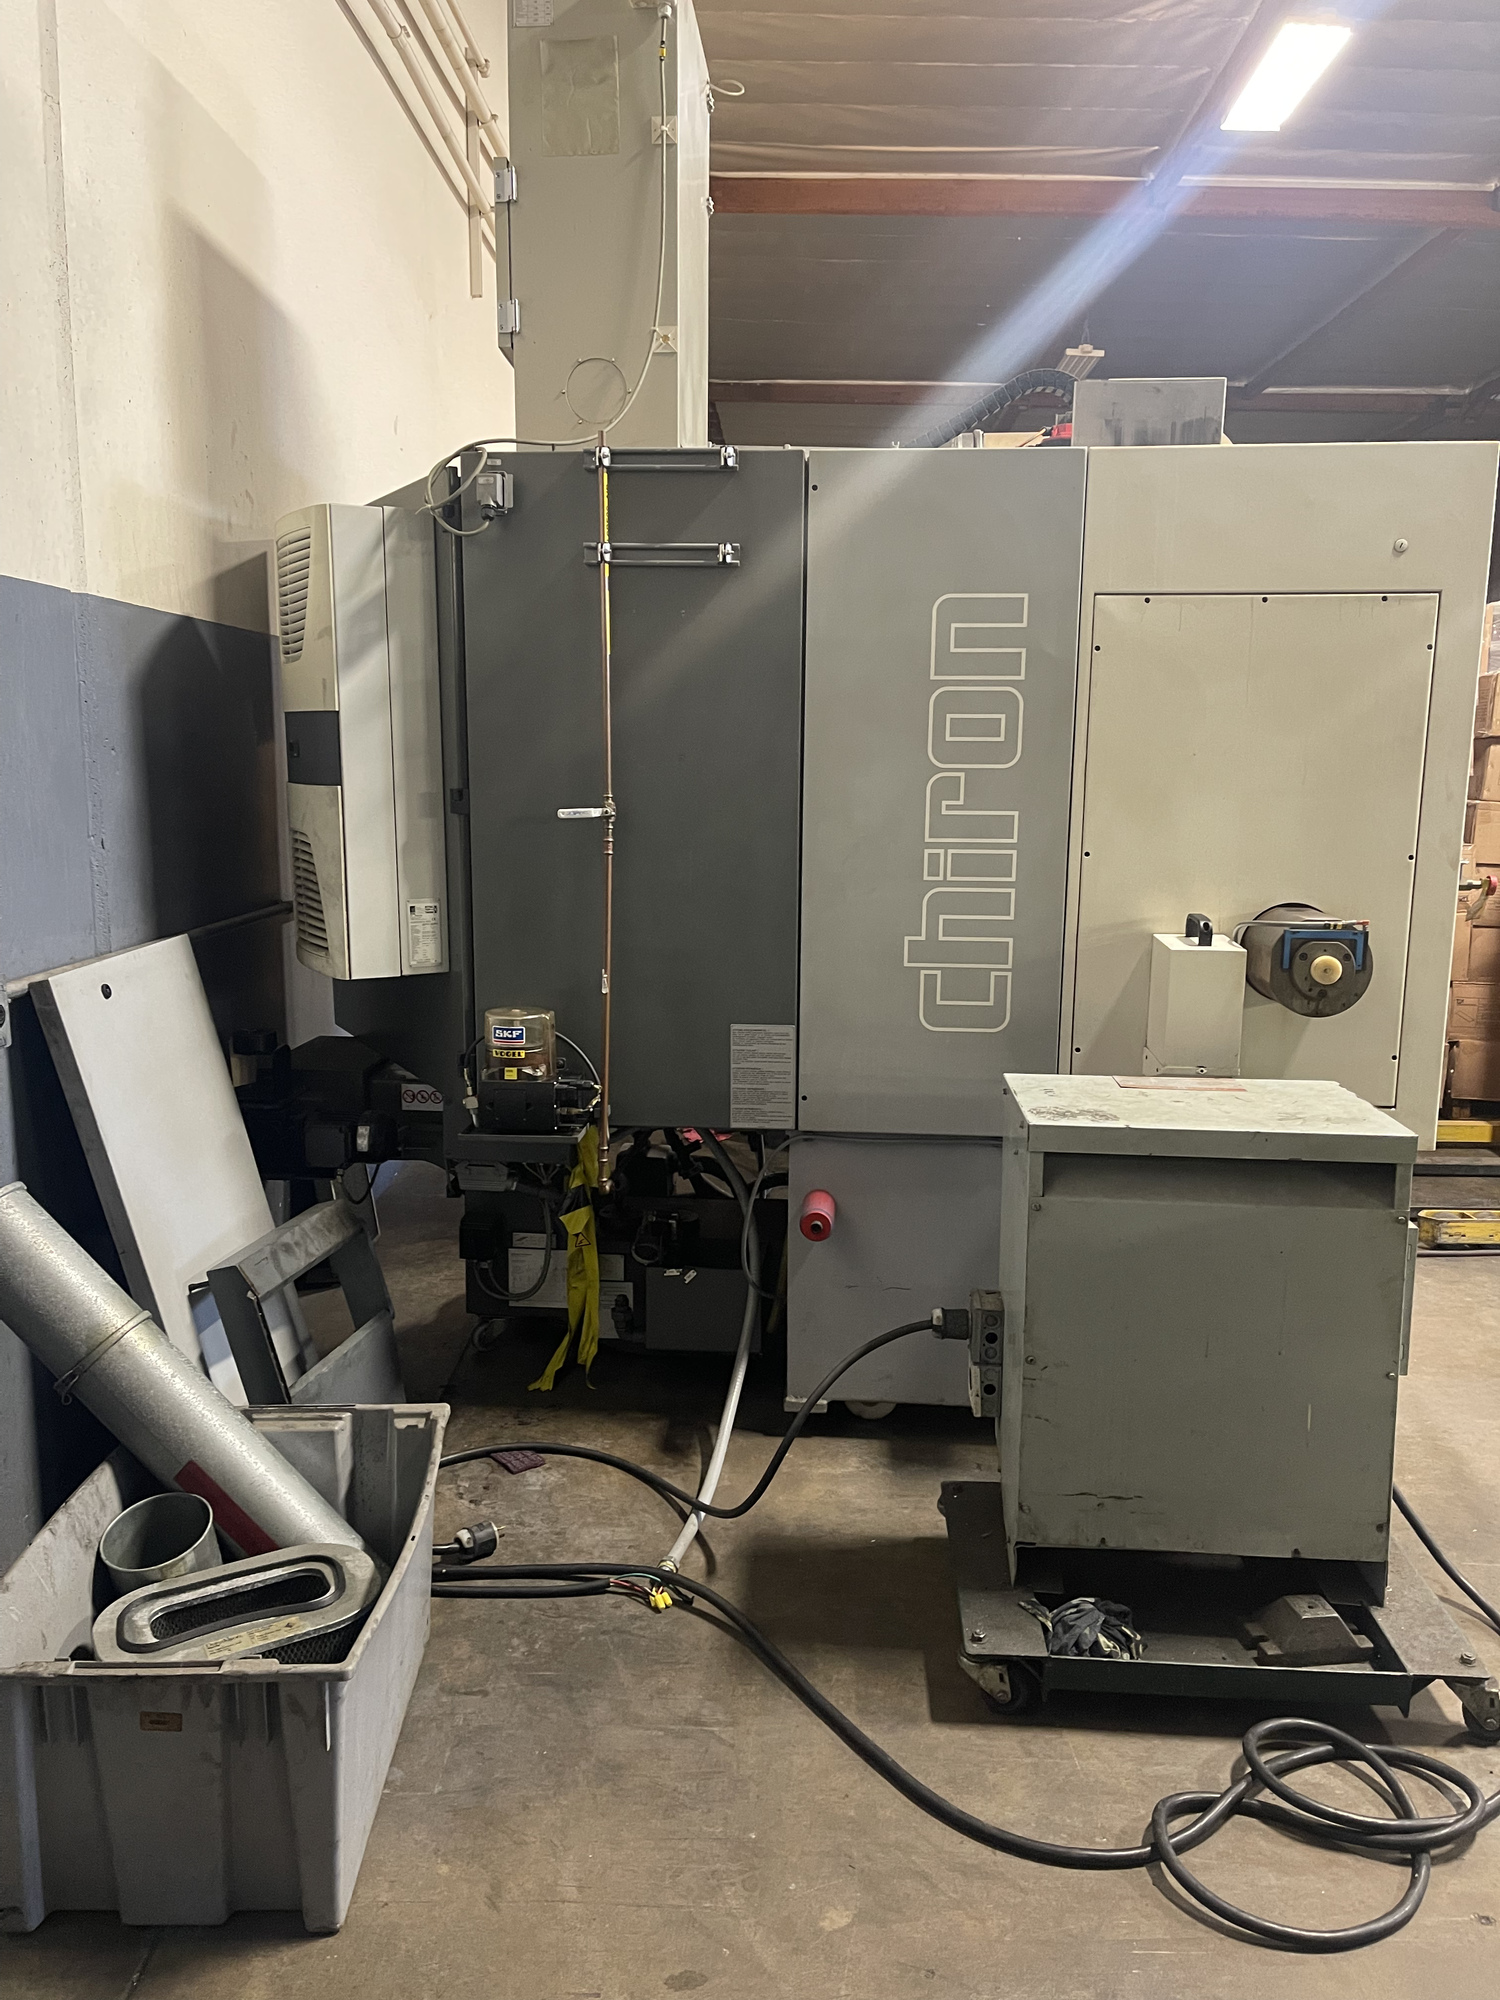 2006 CHIRON FZ08K S MAGNUM Vertical Machining Centers (5-Axis or More) | PM Machines